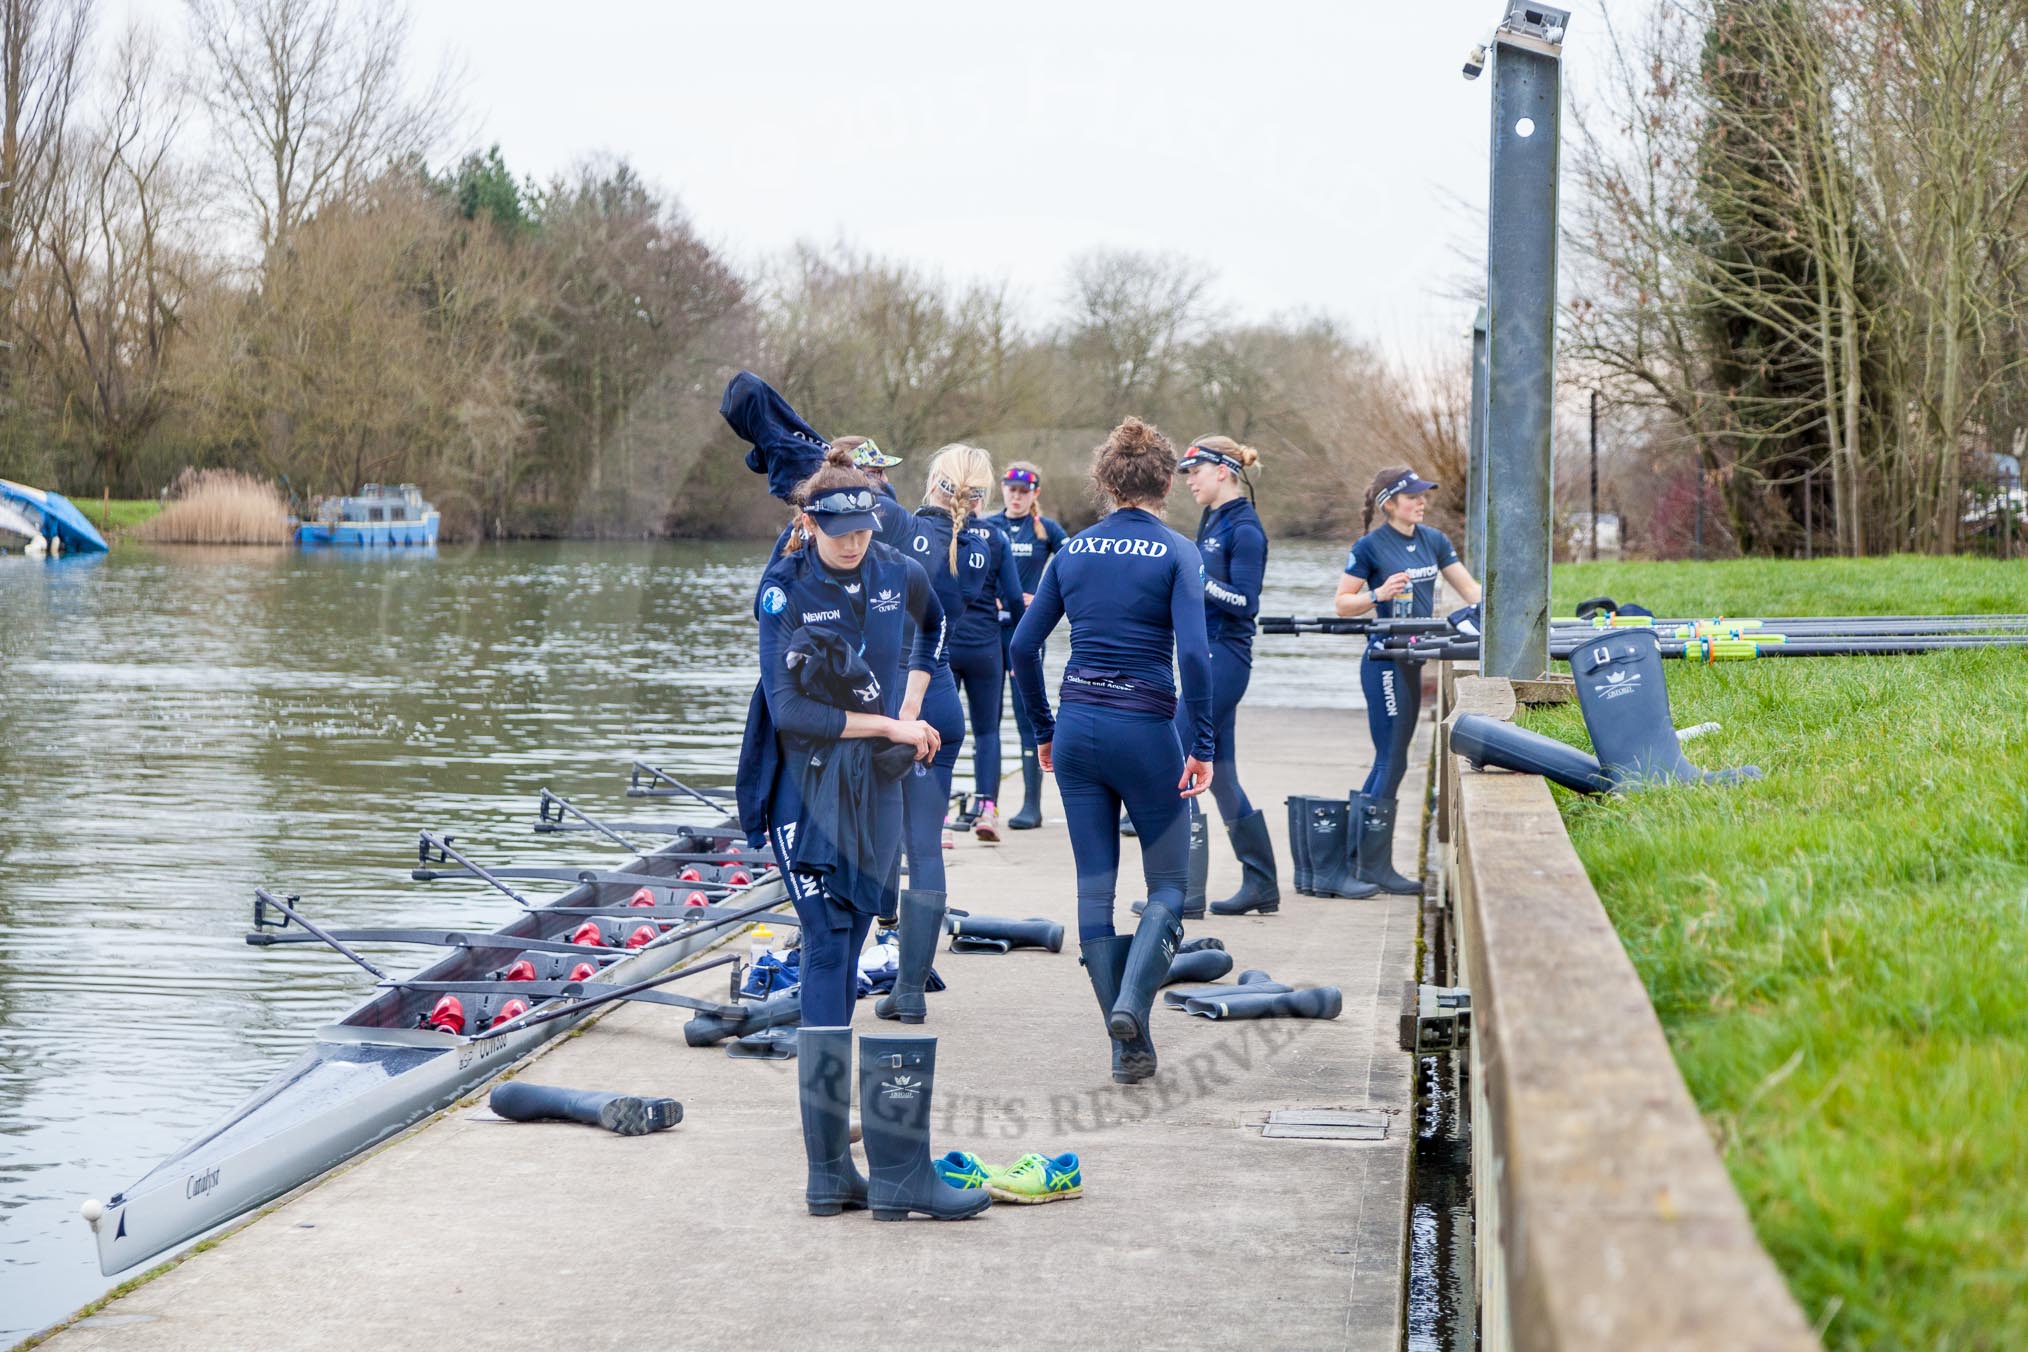 The Boat Race season 2016 - OUWBC training Wallingford: The end of the training session for the OUWBC Blue Boat crew, on the day before the Boat Race Crew Announcement and Weigh-In.
River Thames,
Wallingford,
Oxfordshire,

on 29 February 2016 at 16:37, image #148